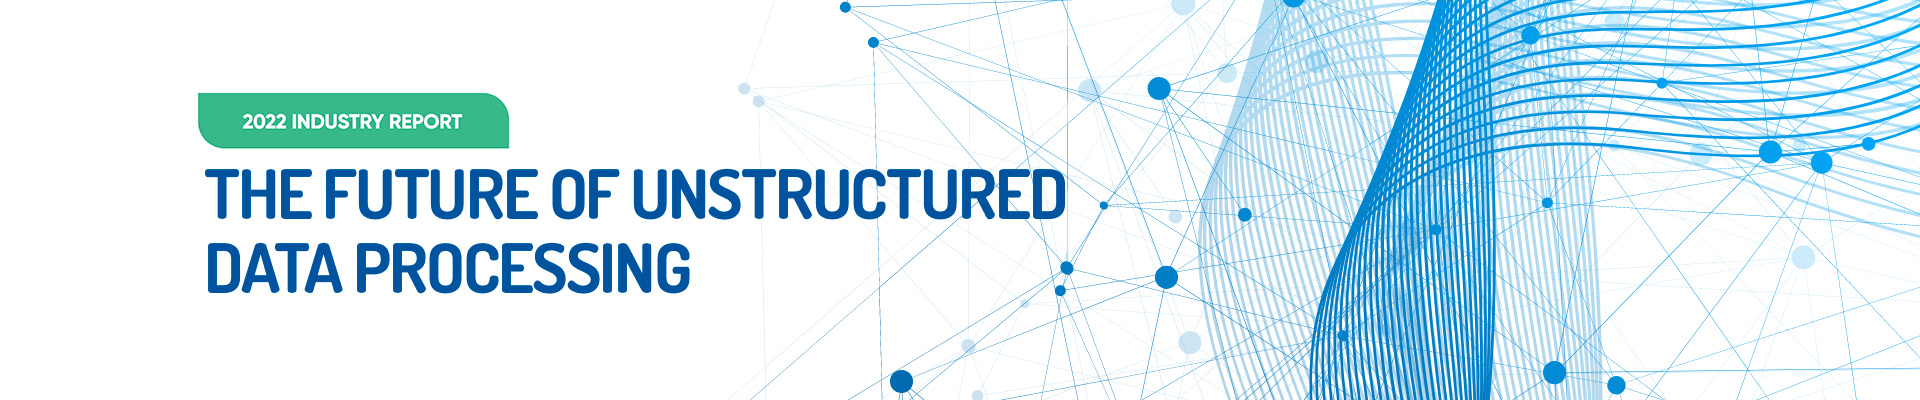 Industry Report: Future of Unstructured Data